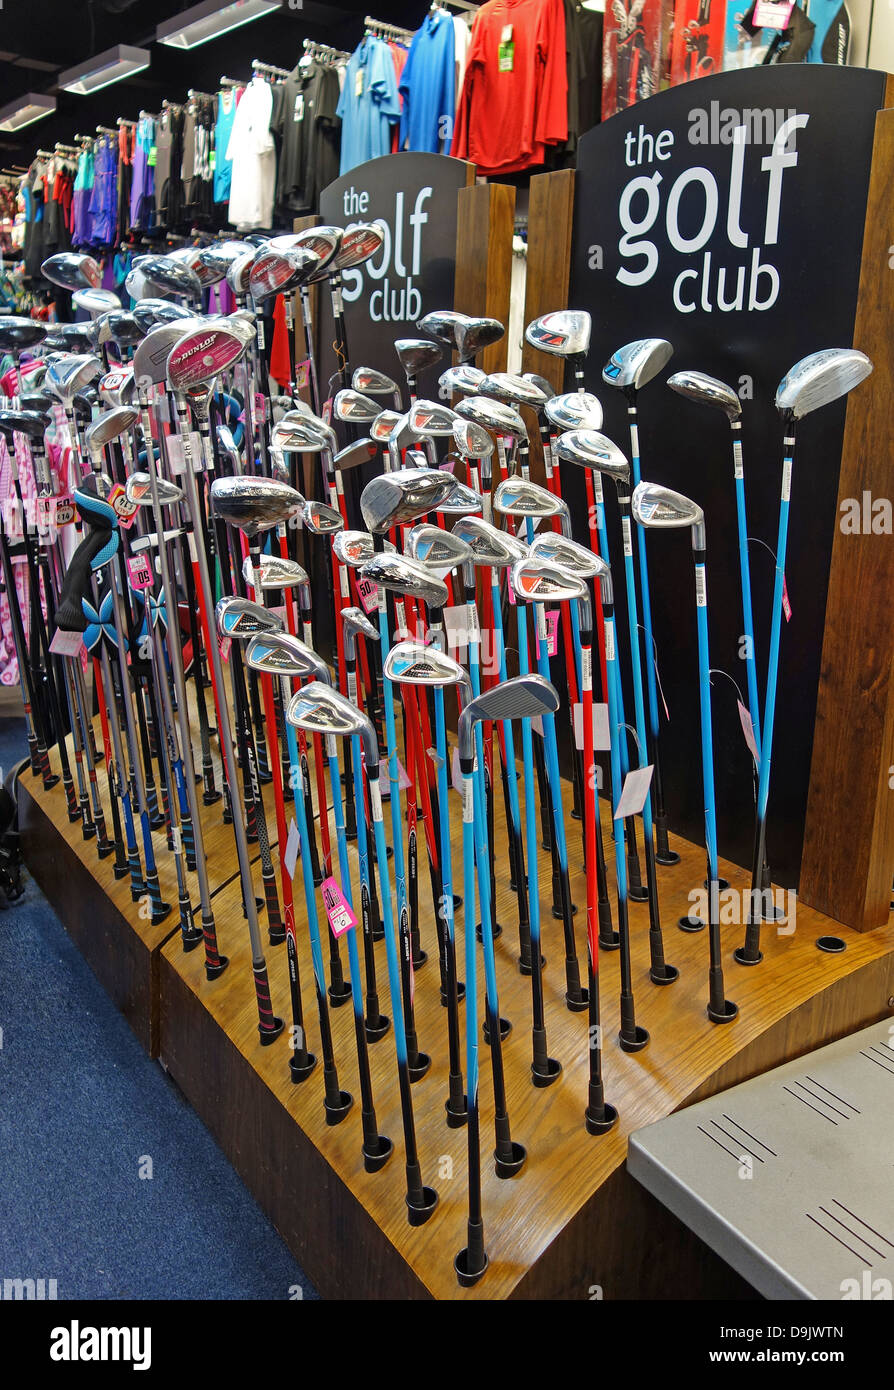 Golf clubs for sale in a sporting goods store, uk Stock Photo